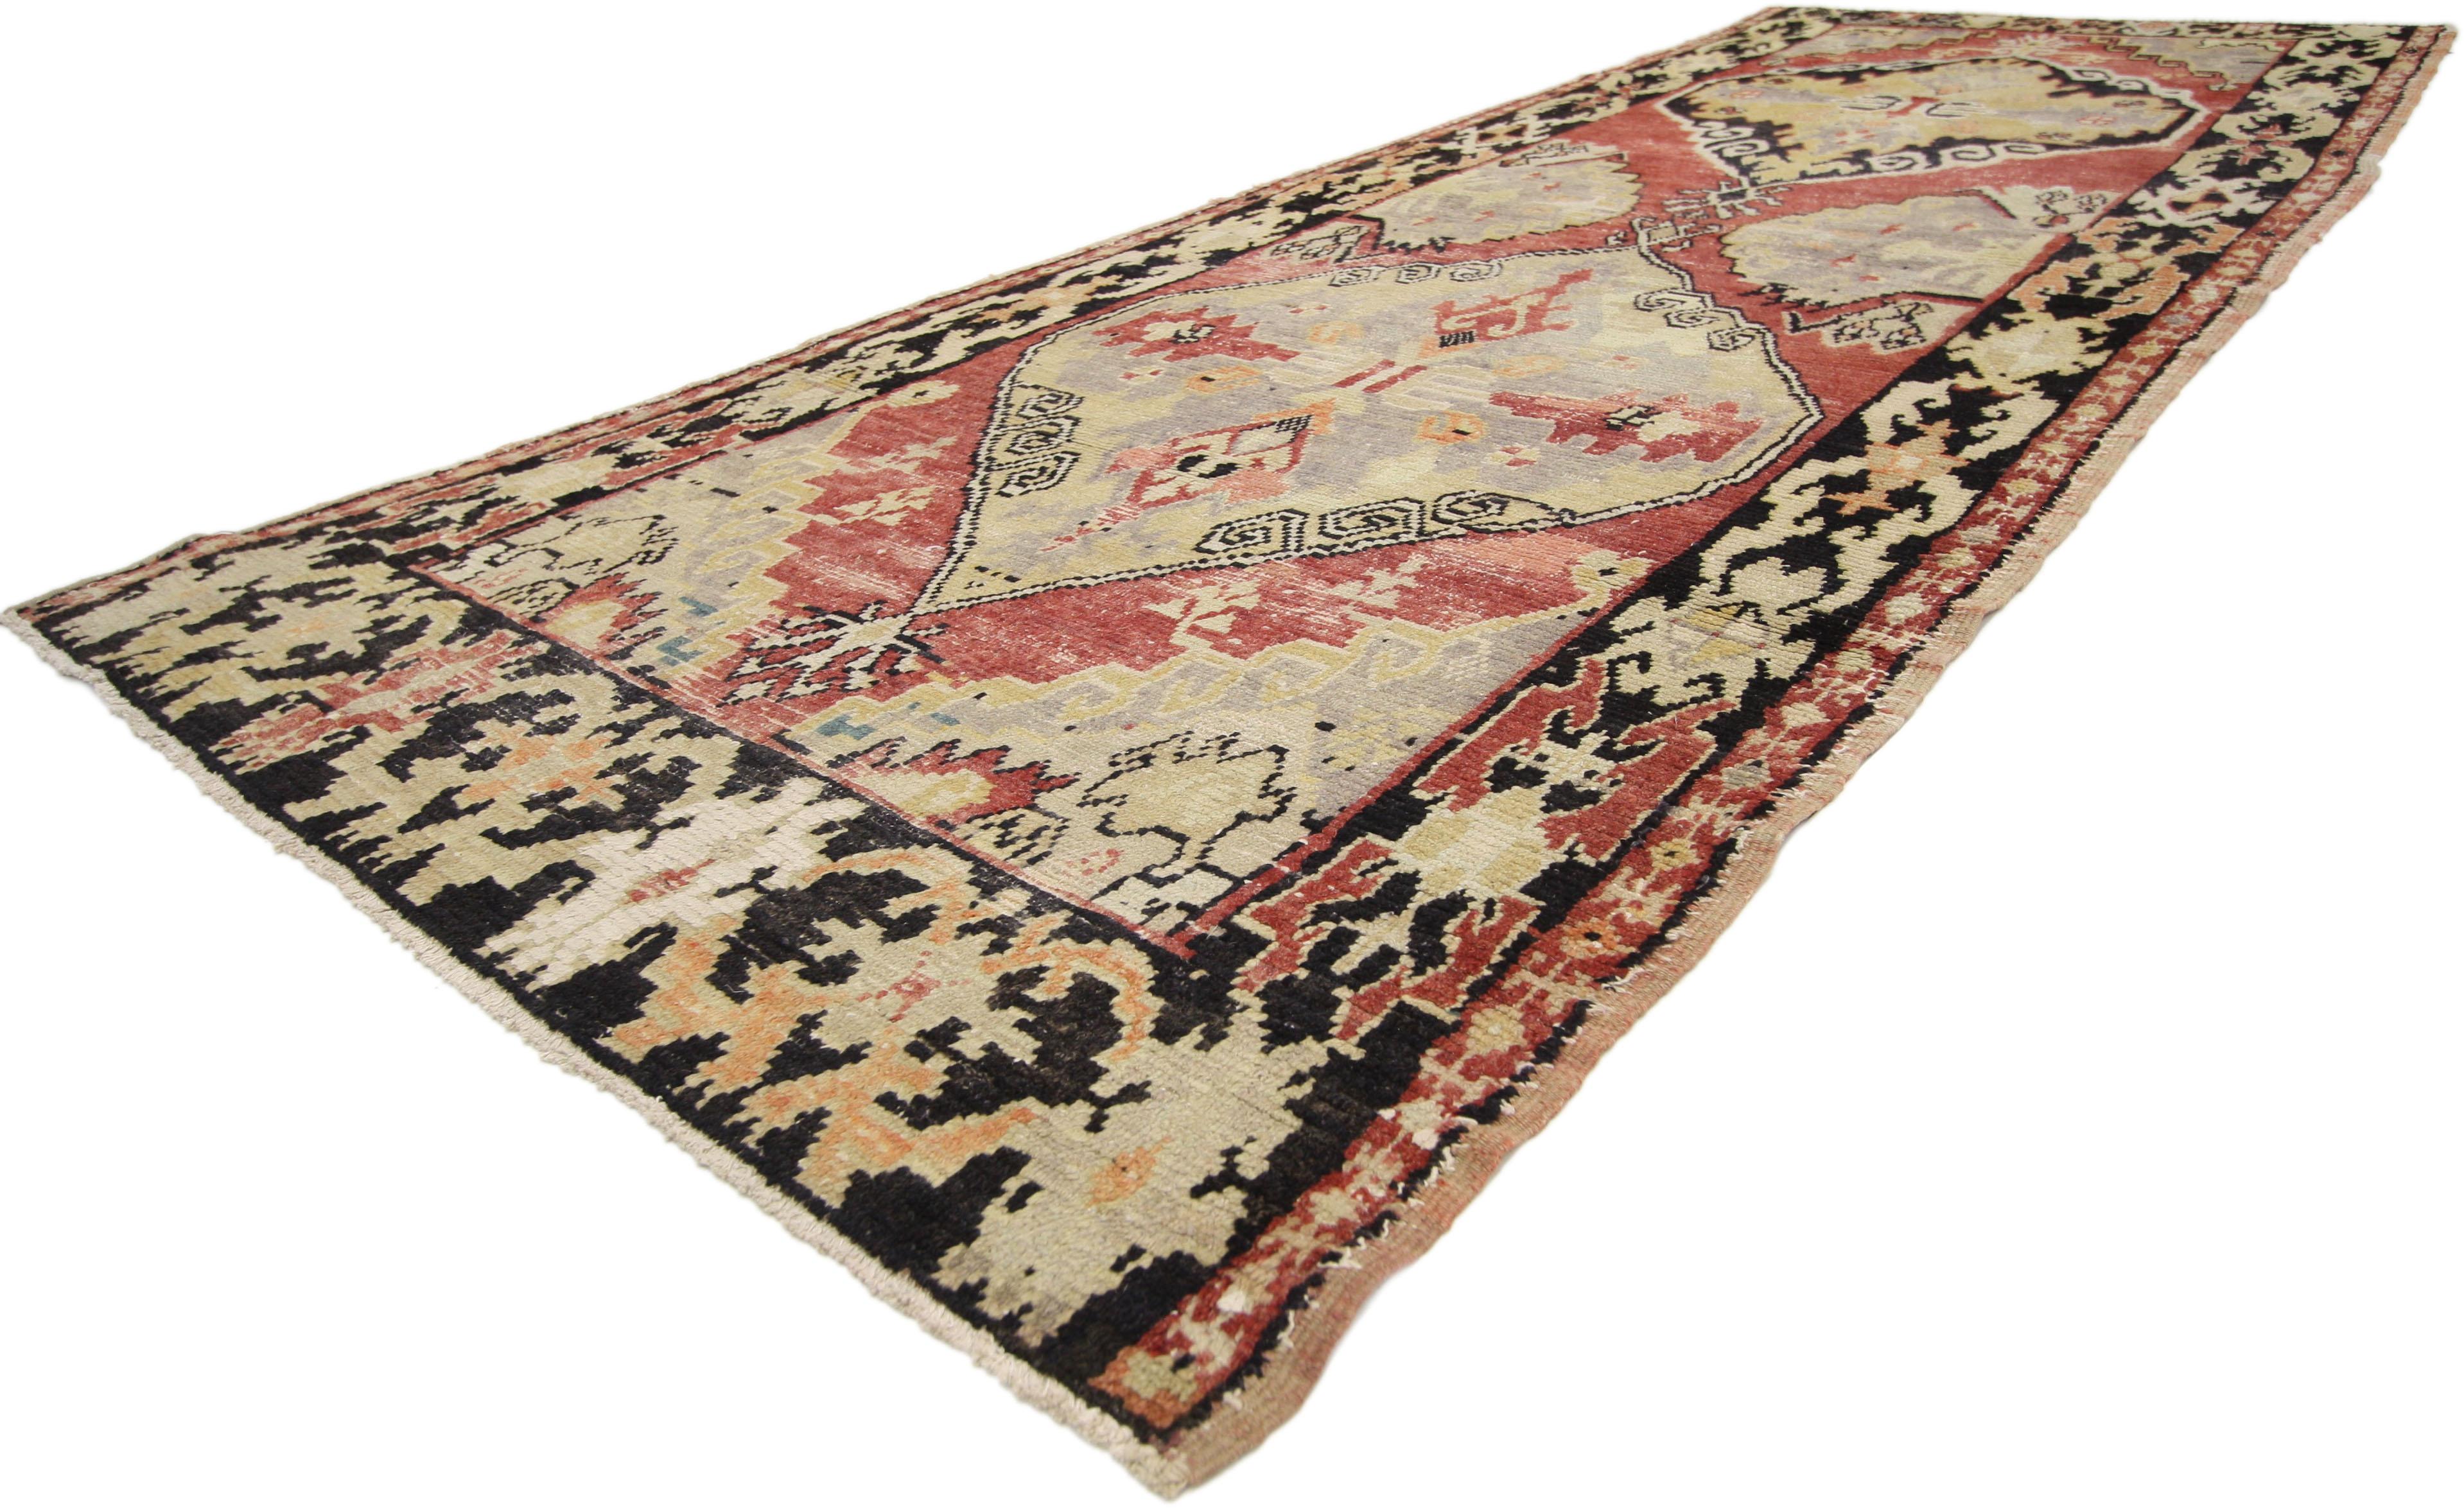 50277, distressed vintage Turkish Oushak runner with rustic lodge style, hallway runner. This hand knotted wool vintage Turkish Oushak runner features two large stepped hexagonal medallions anchored with Anatolian pendants spread across an abrashed